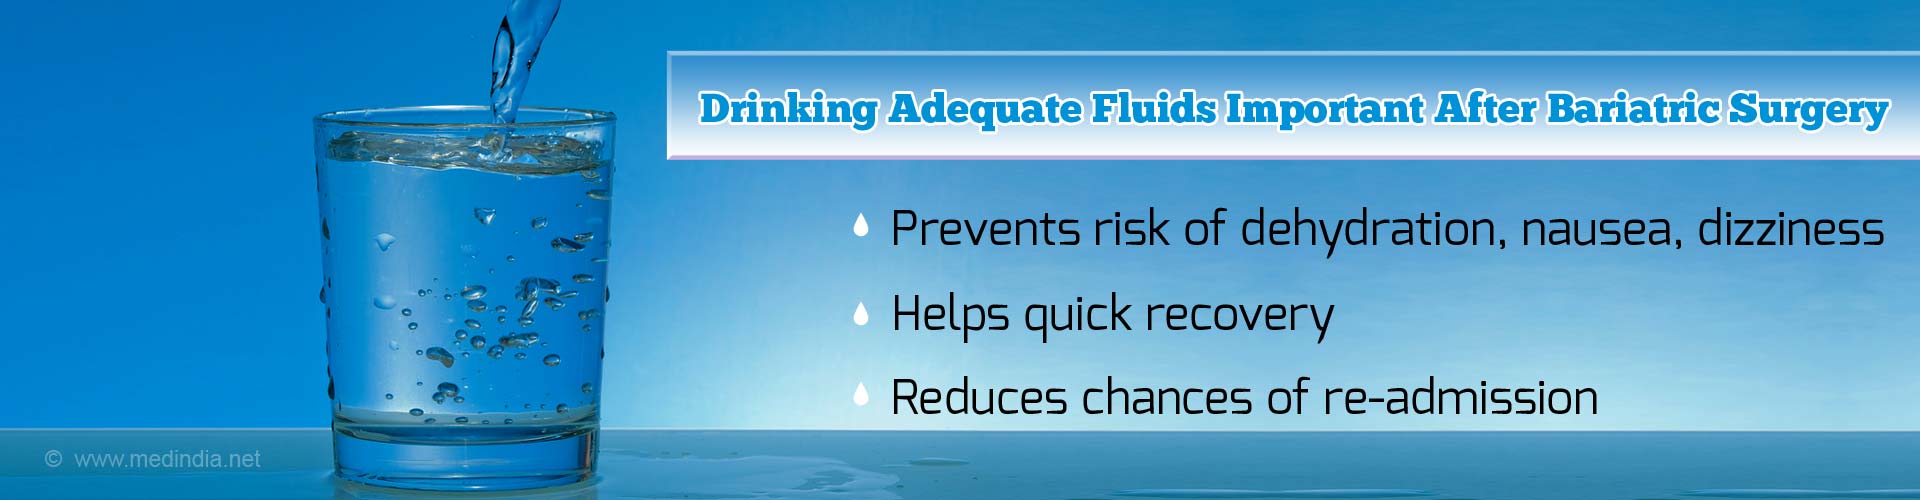 Drinking adequate fluids post bariatric surgery
- Prevent risk of dehydration, nausea, dizziness
- Helps quick recovery
- Reduces changes of re-admission